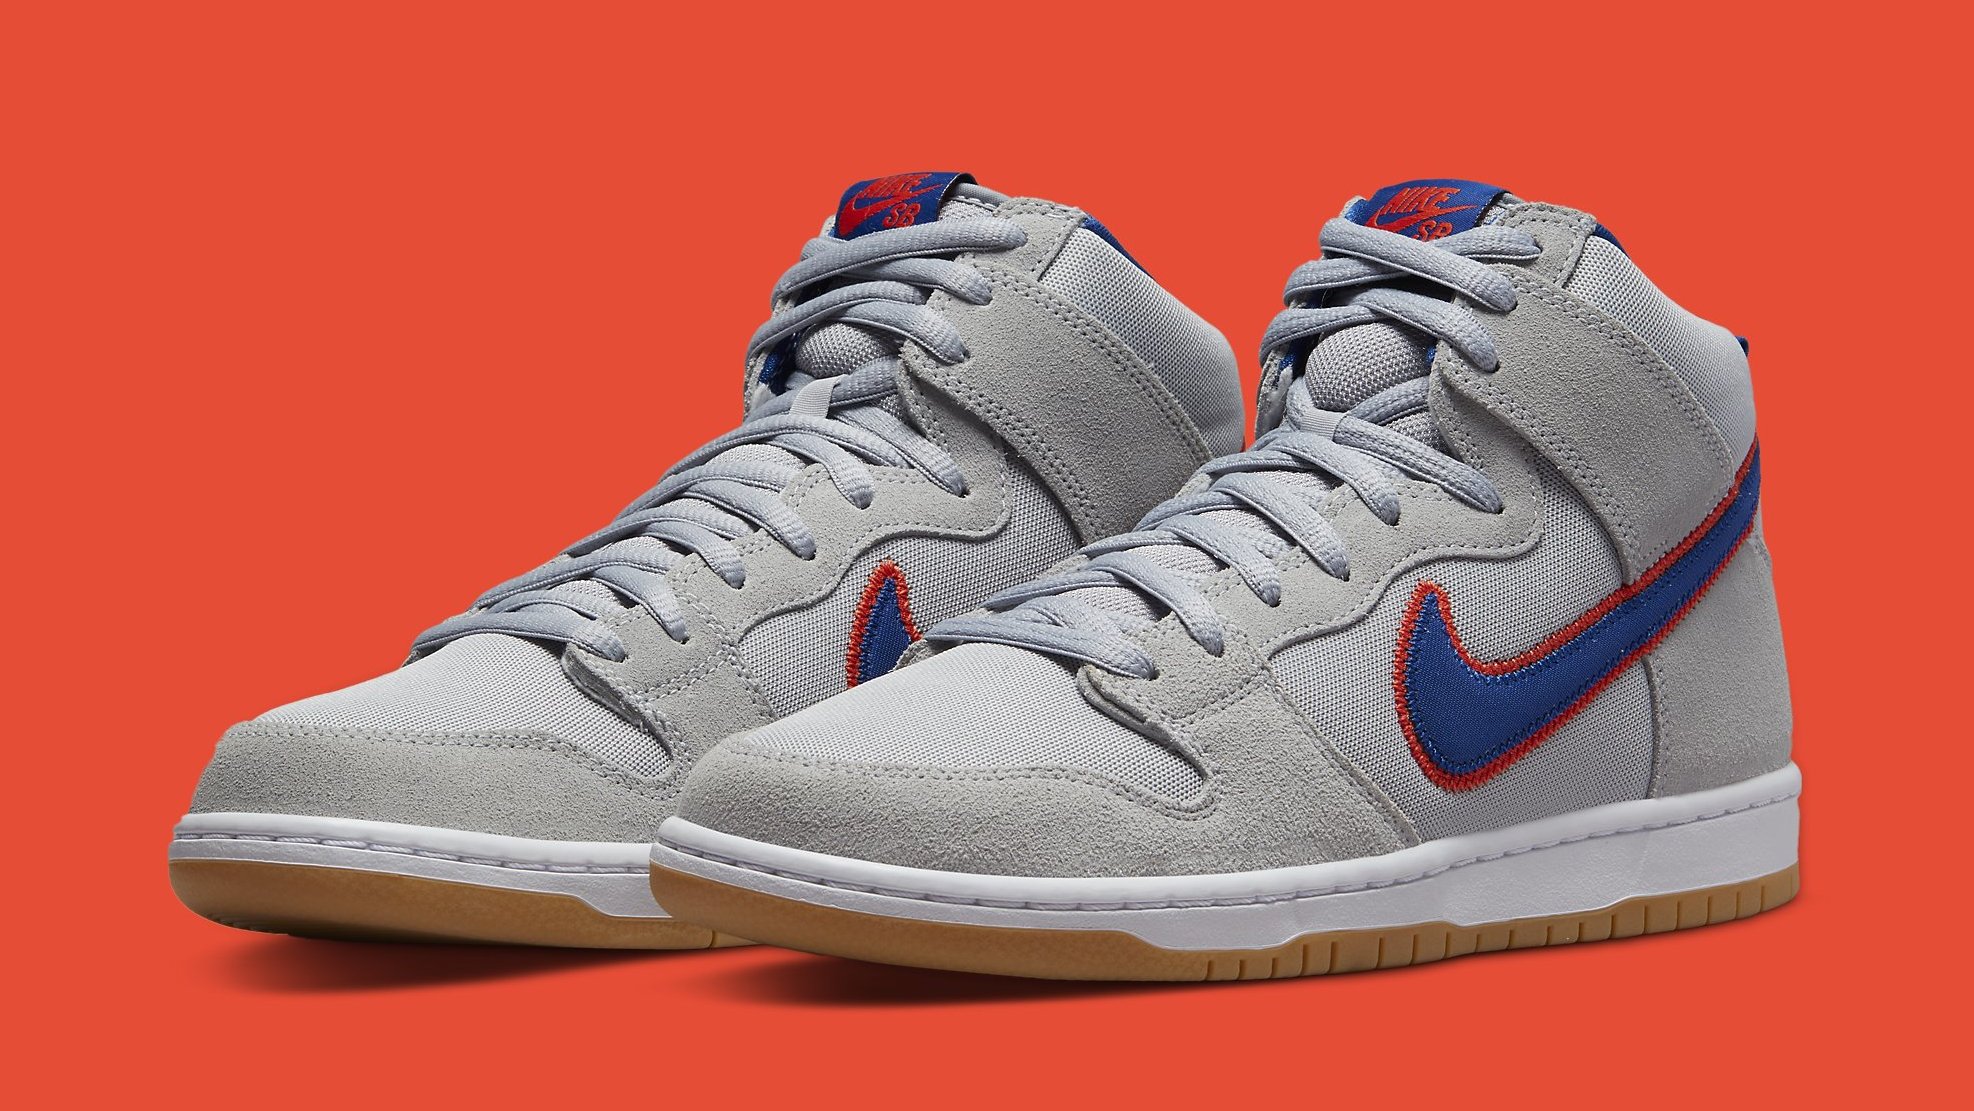 Nike SB Dunk High 'New York Mets' Release Date 2022 DH7155-001 